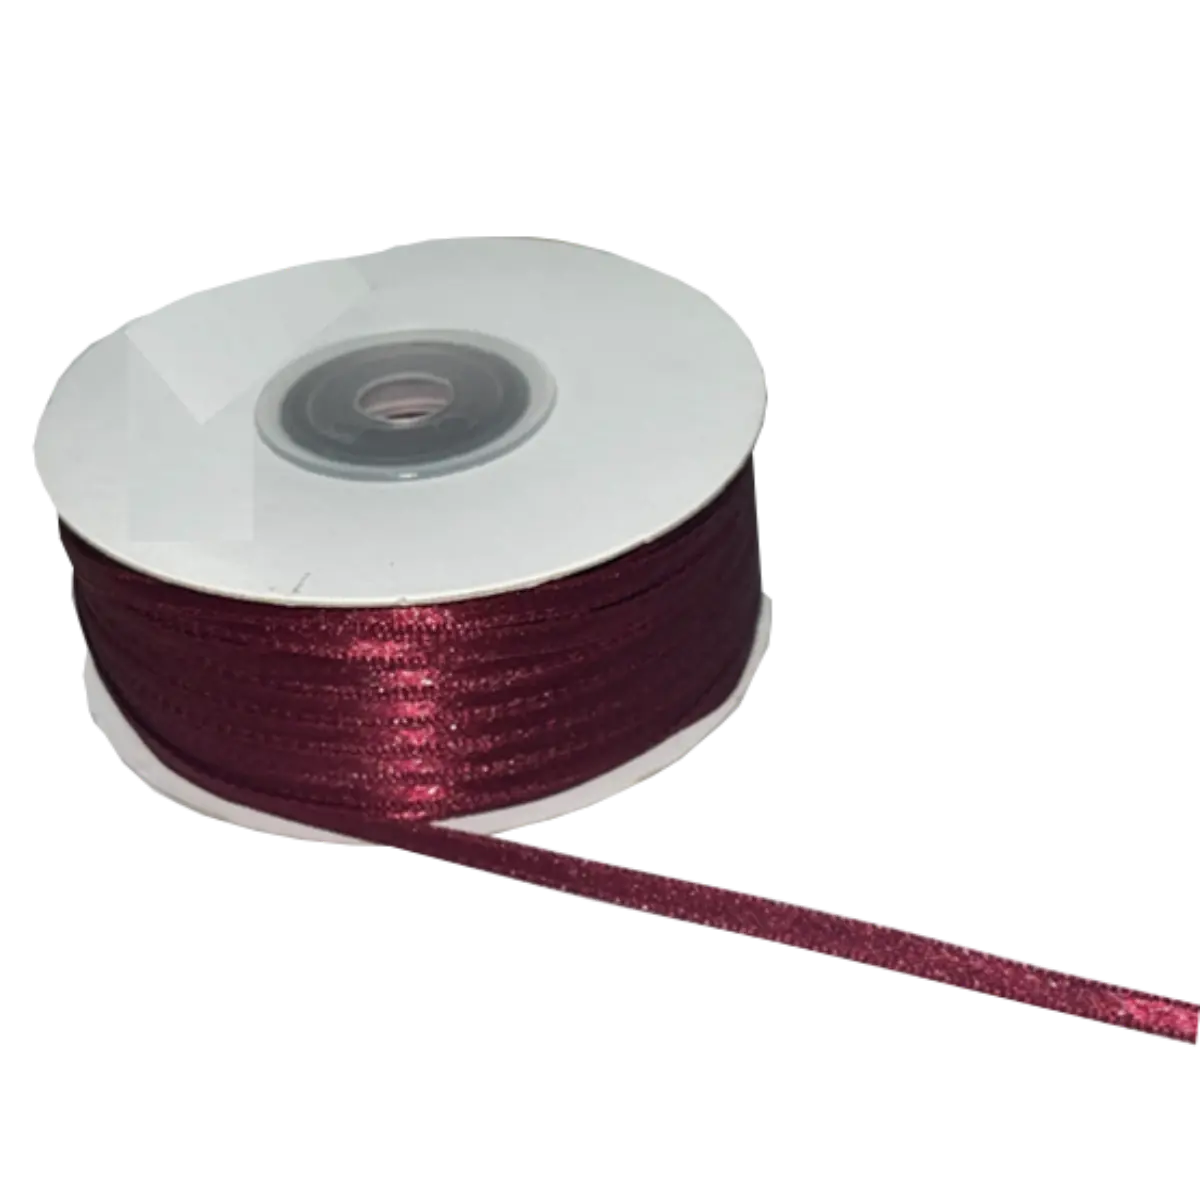 Burgundy Double Sided Satin Ribbons - 3mm Wide By 10mts